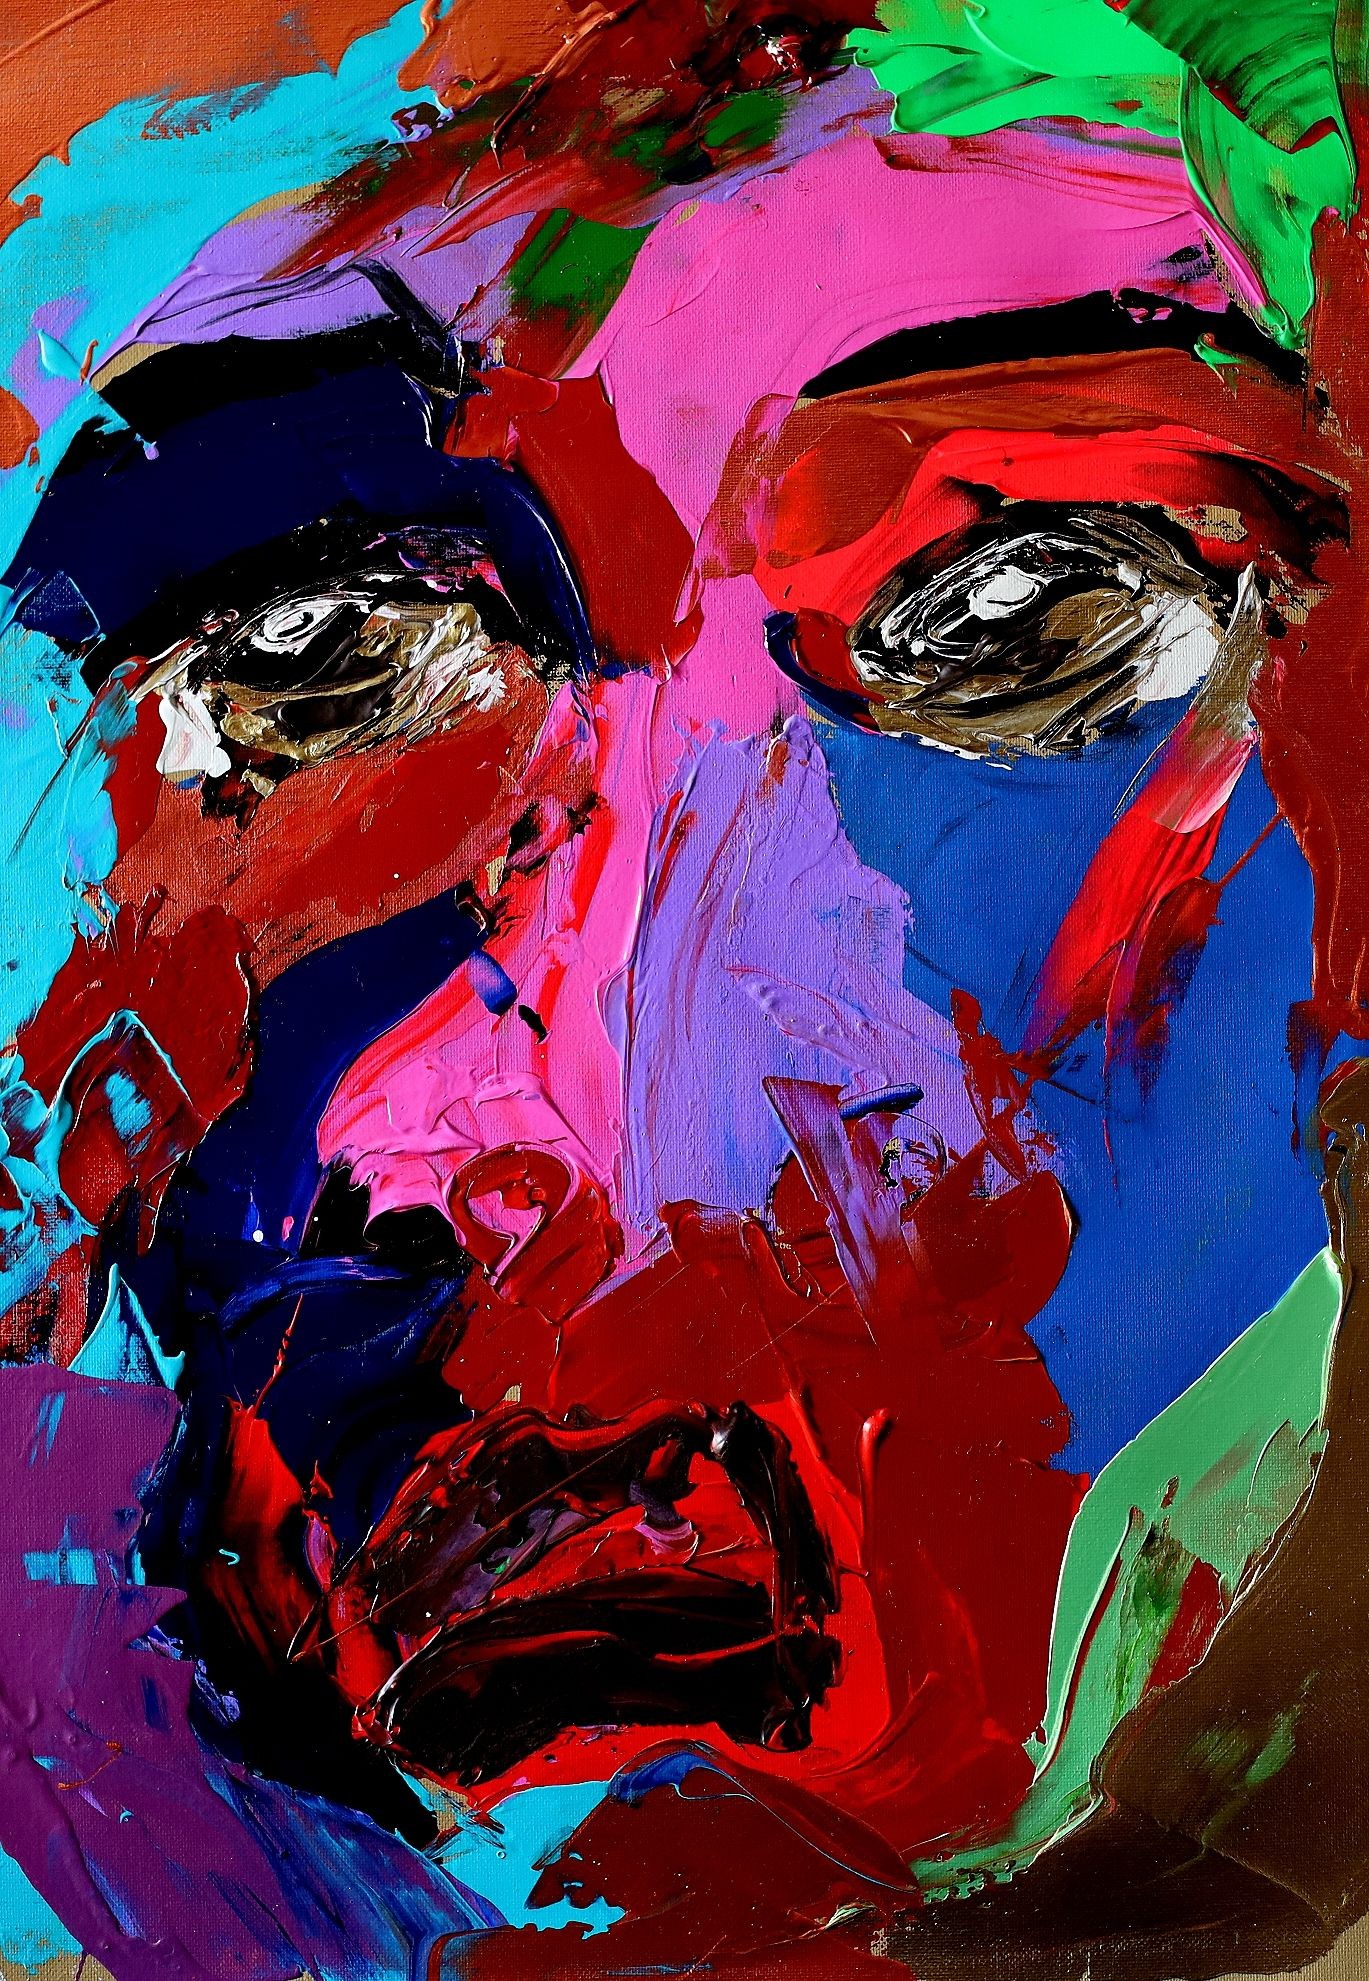 ▷ Unaltd (man of color series) by Harold Smith, 2022 | Painting